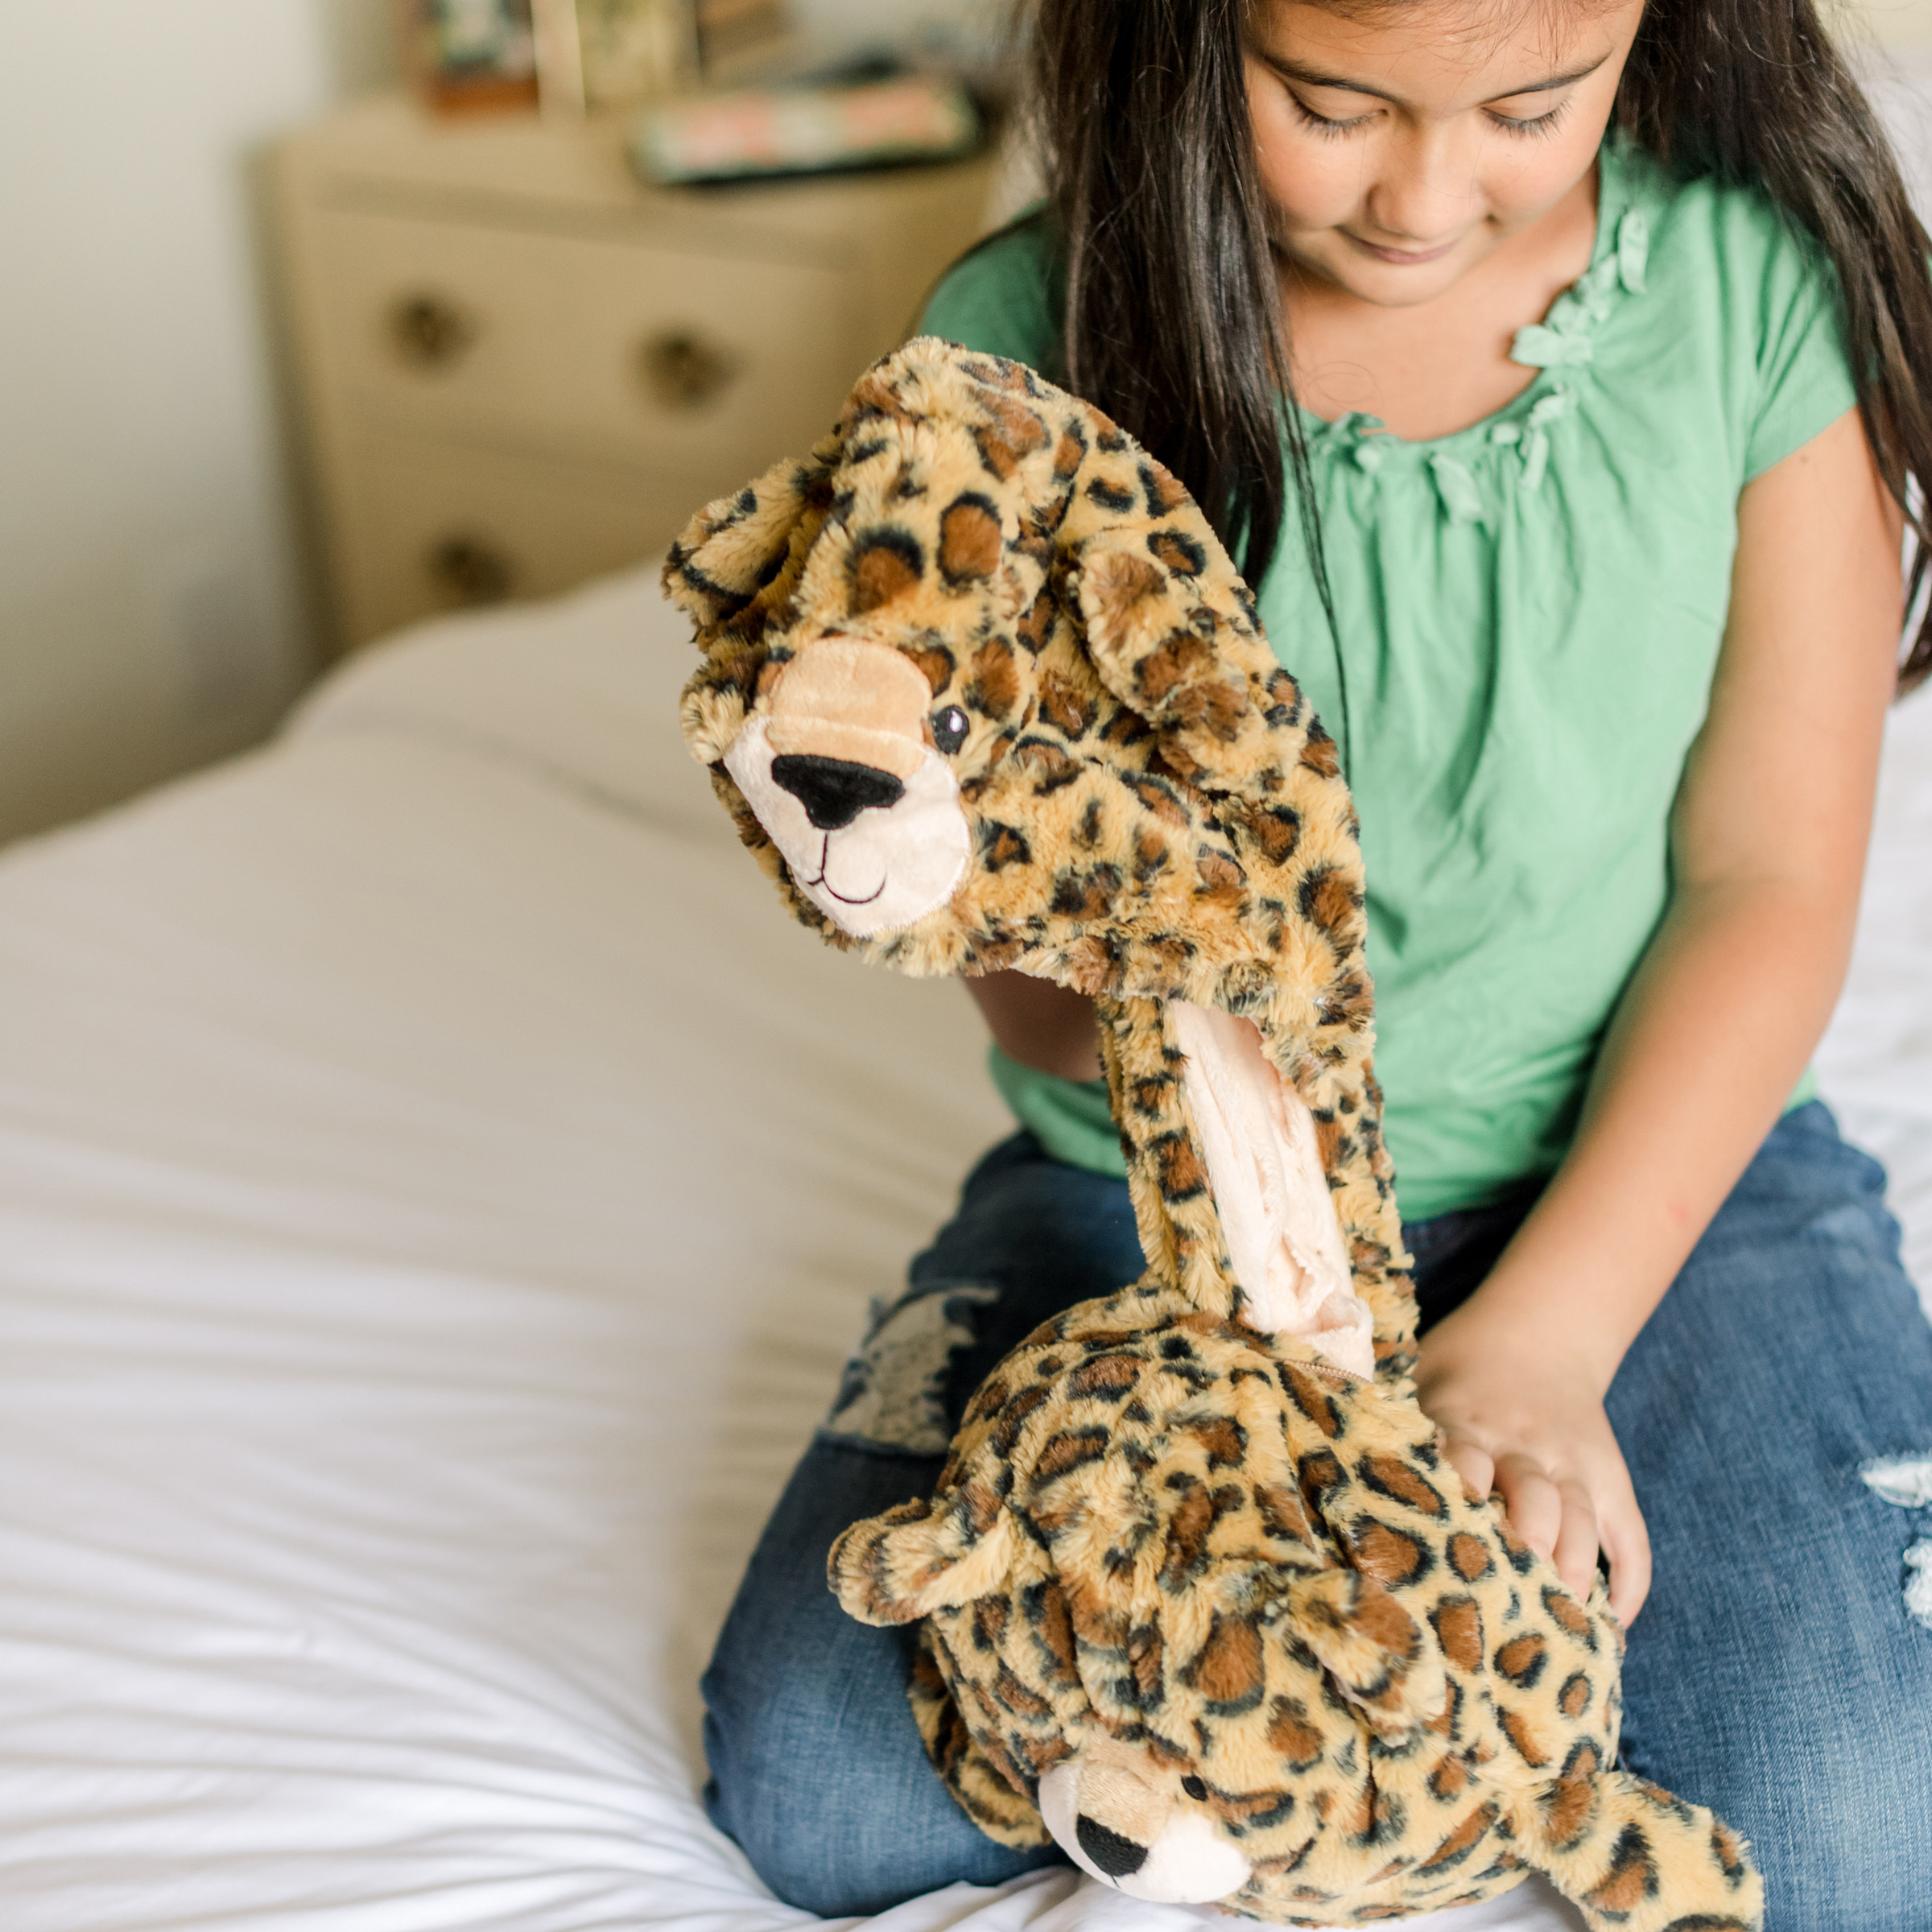 Animal Adventure Wild for Style™ 2-in-1 Transformable Cape 10" Leopard Plush Toy - image 4 of 7